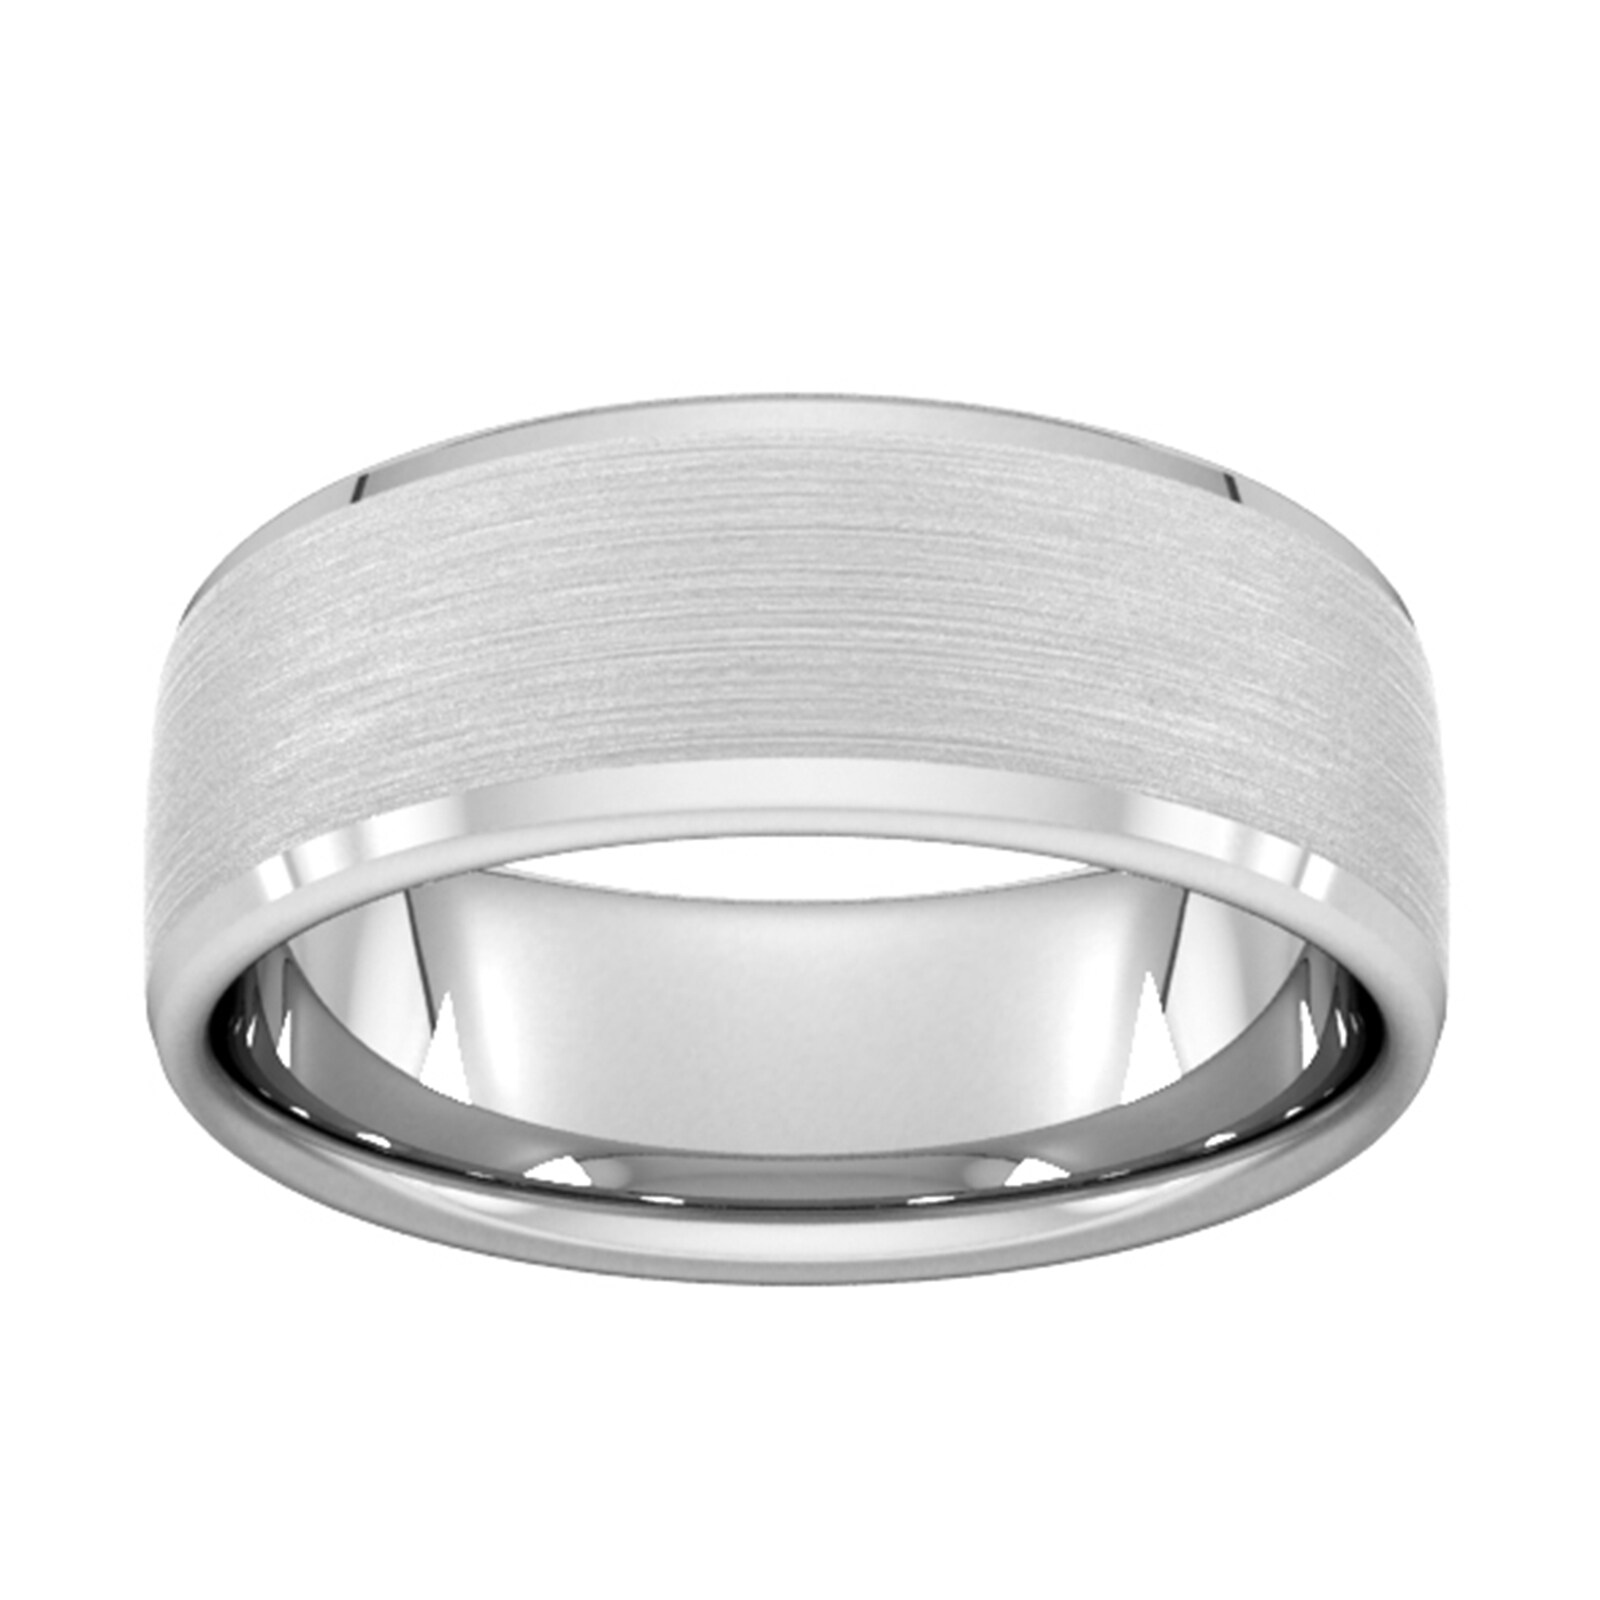 8mm Slight Court Standard Polished Chamfered Edges With Matt Centre Wedding Ring In Platinum - Ring Size J